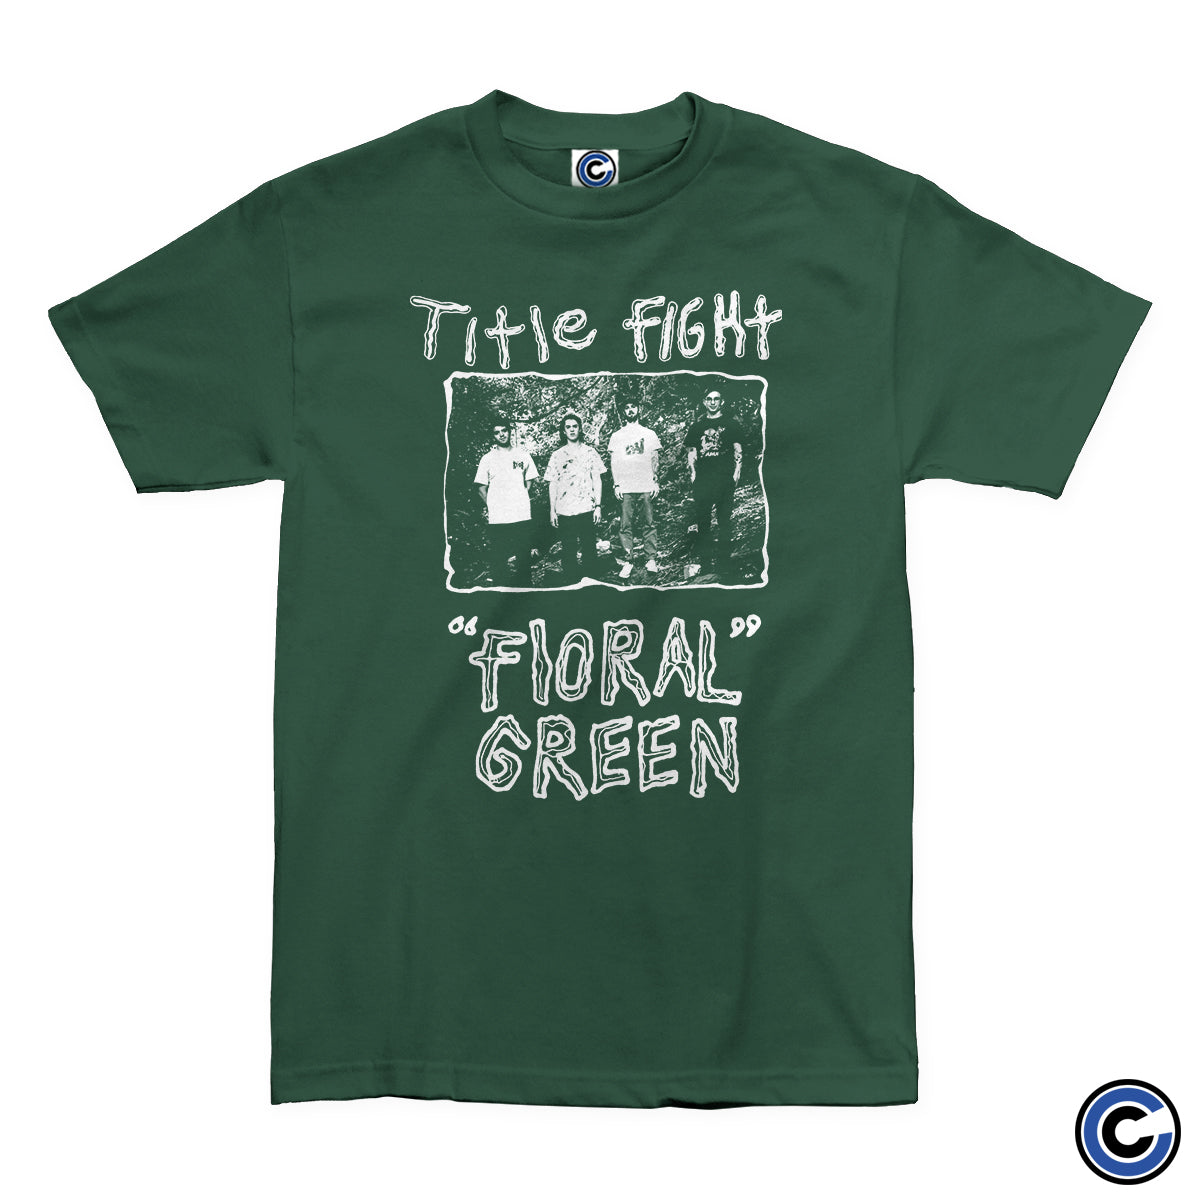 Title Fight "Floral Green Promo" Shirt